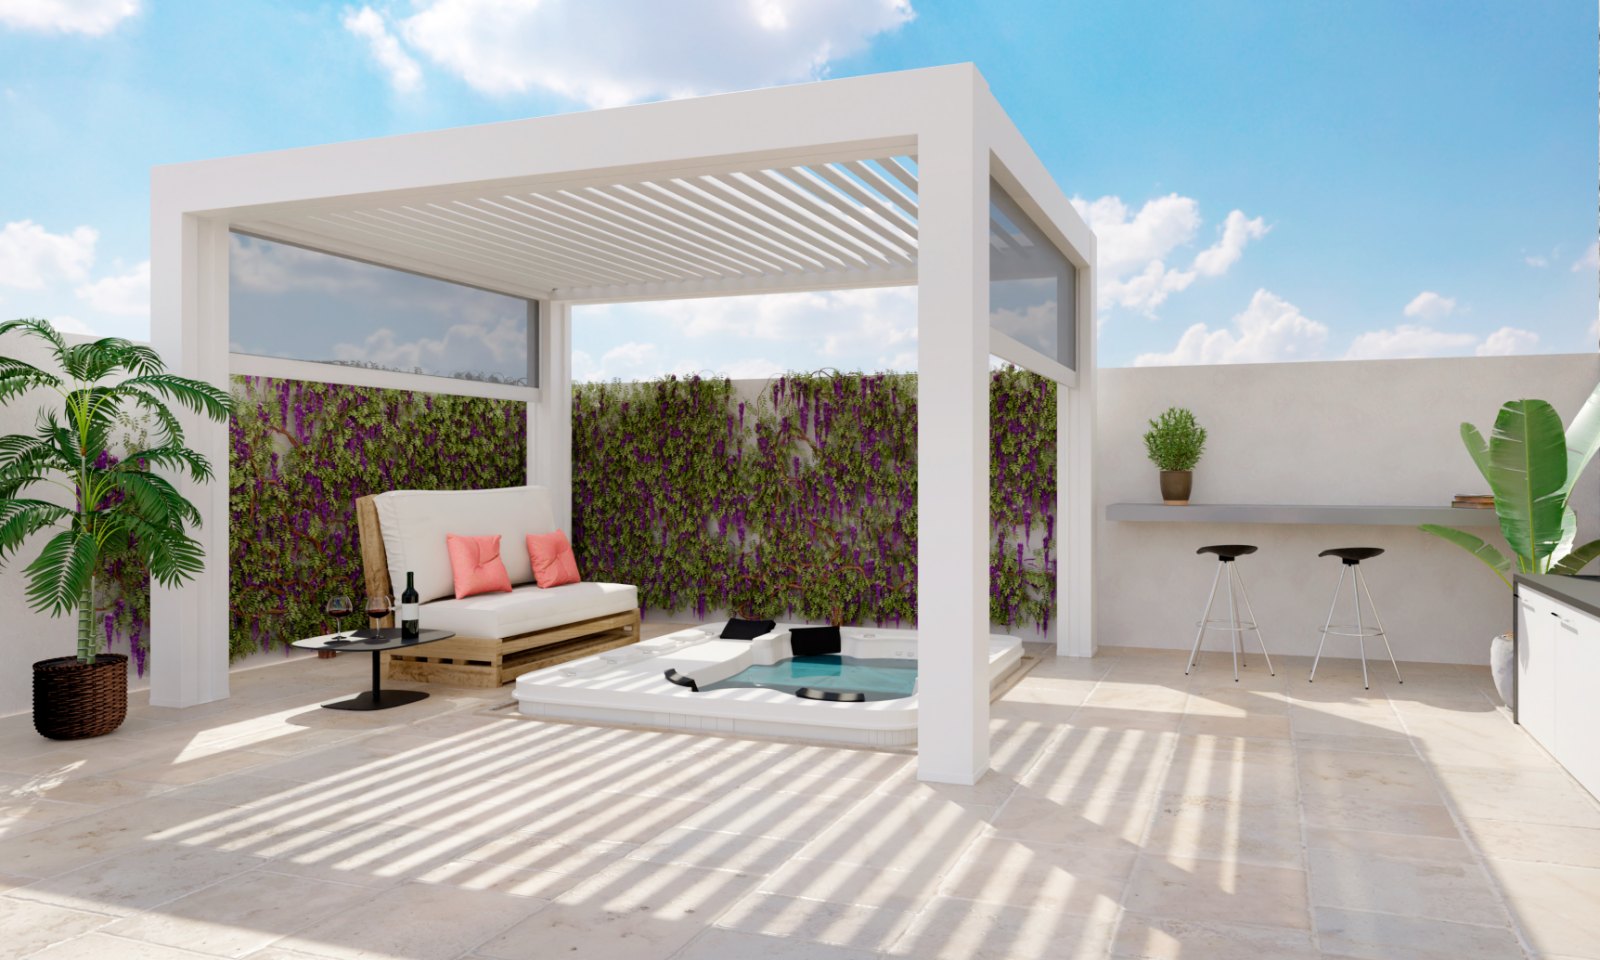 3D illustration of white outdoor bioclimatic pergola on urban patio with jacuzzi and barbecue. White pallet couch next to hot whirlpool bath.